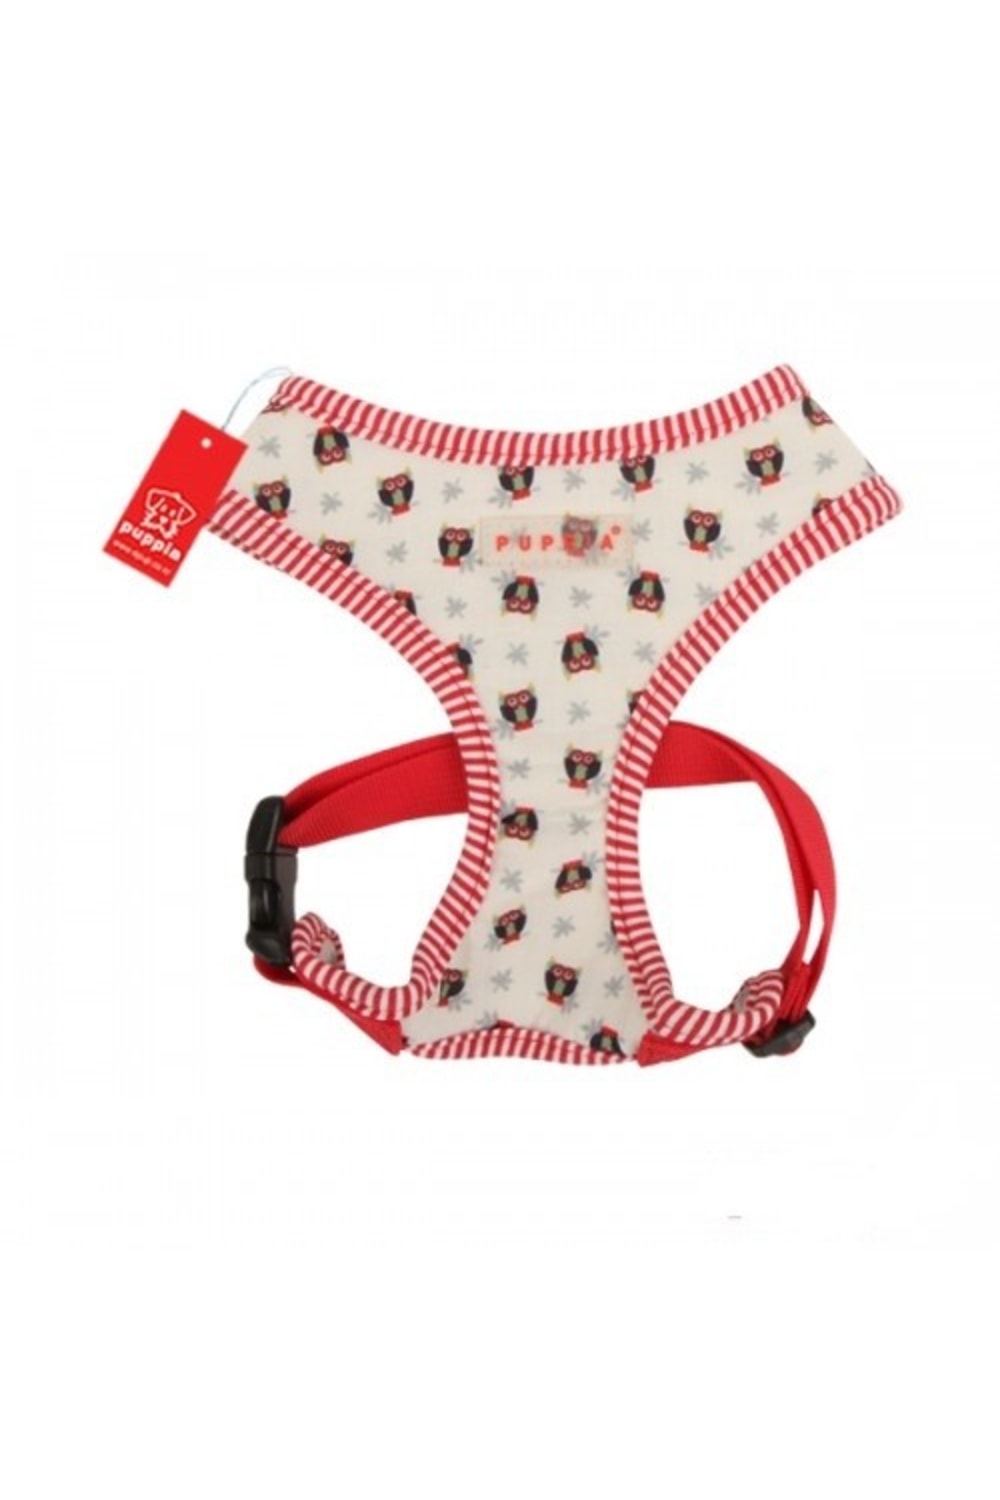 Puppia Owlet Dog Harness A